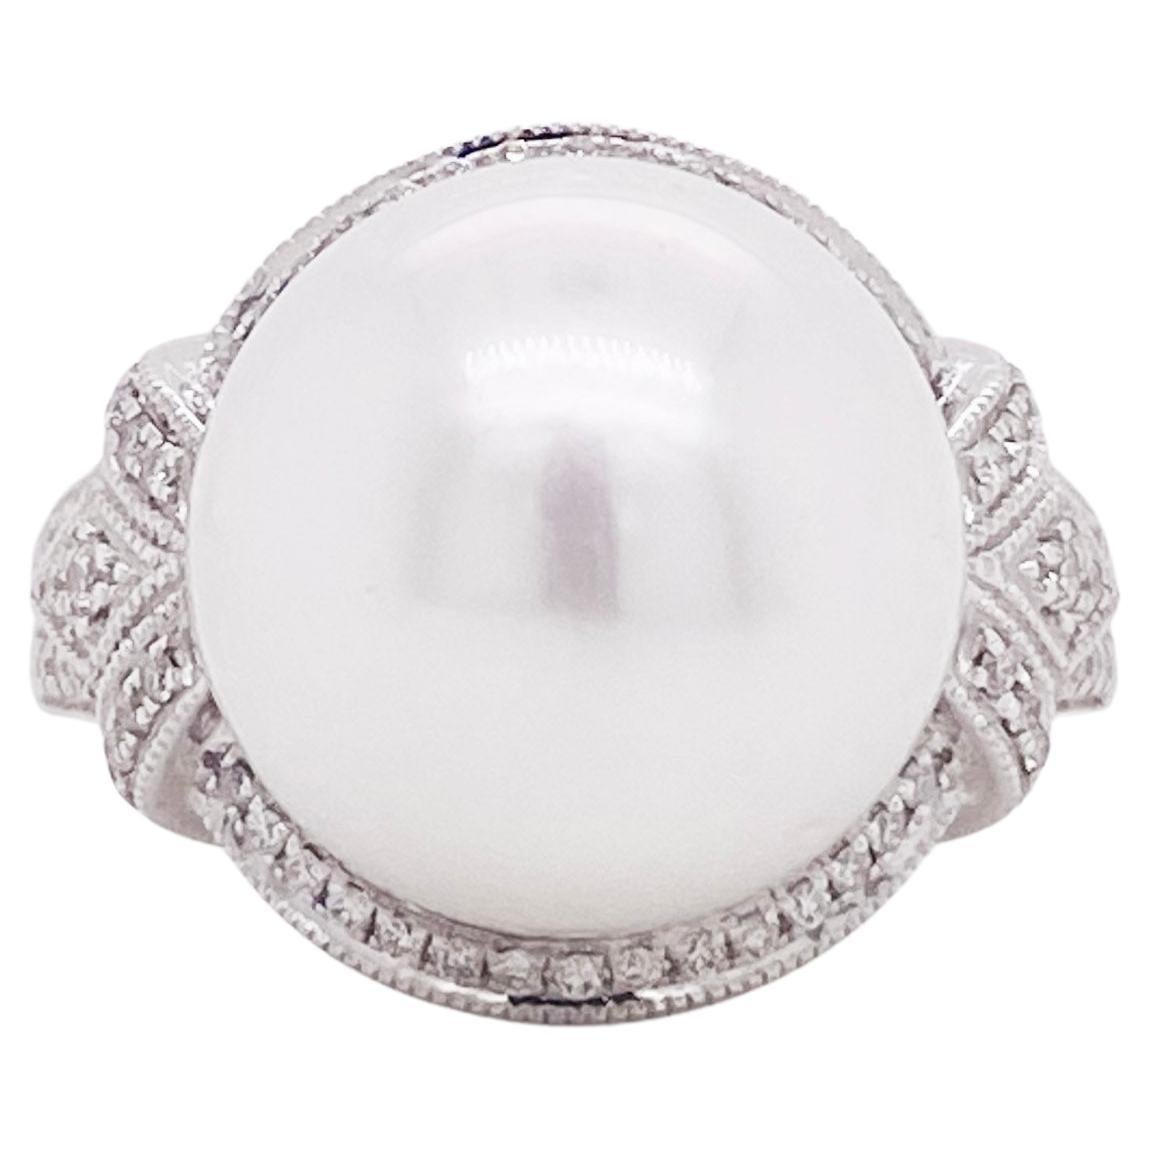 For Sale:  South Sea Pearl w Diamond Statement Ring, White Gold, Pearl Cultured